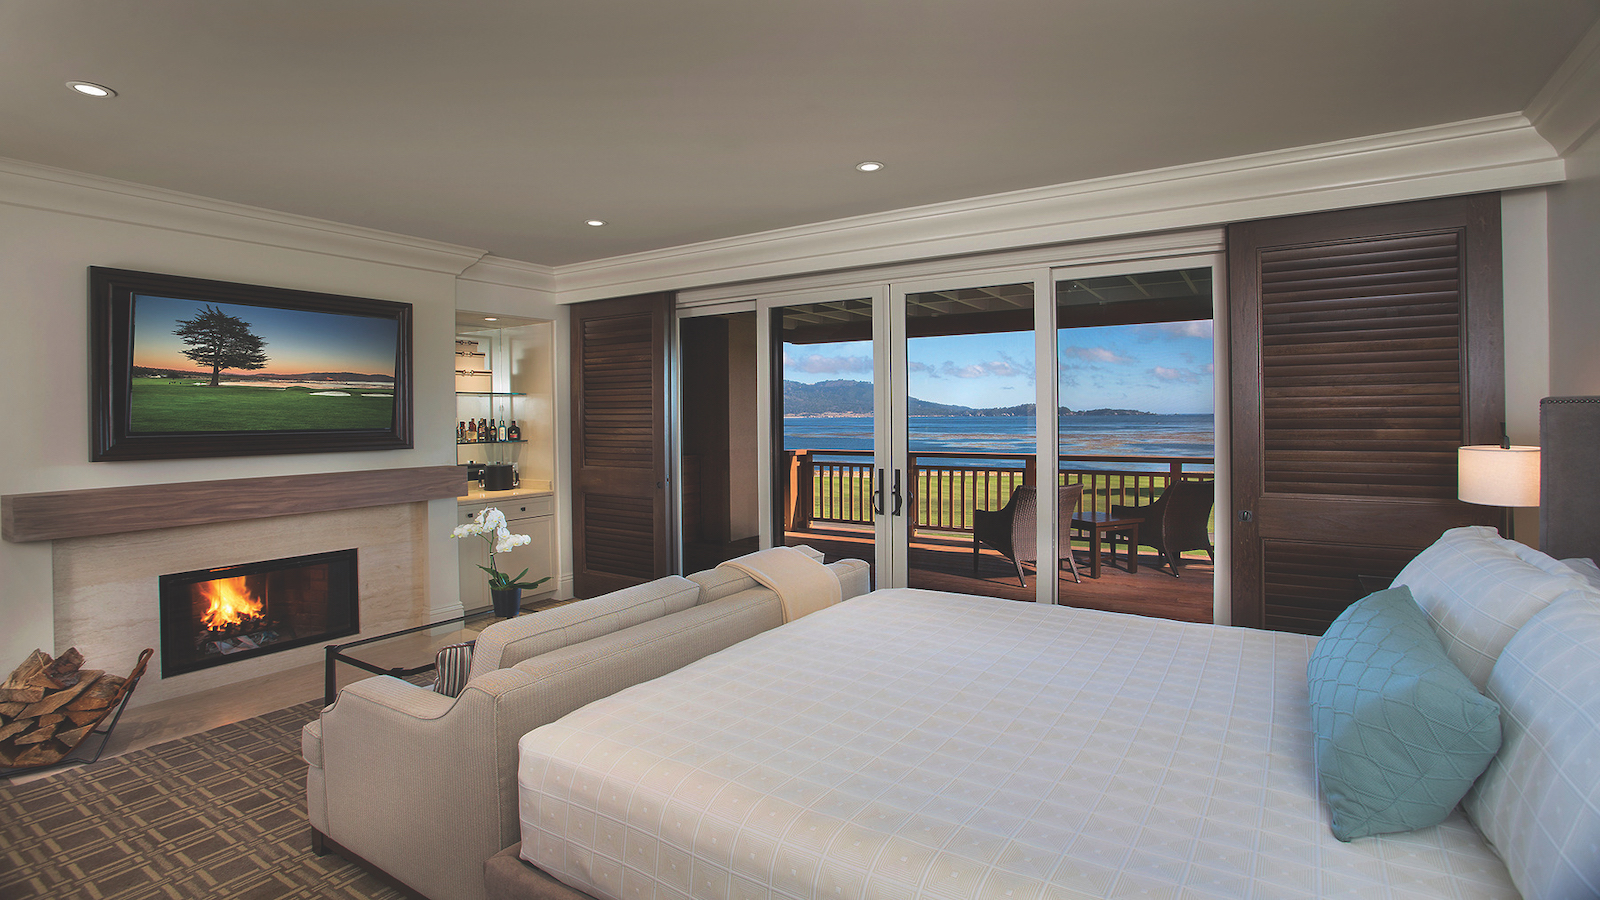 Luxury hotels Monterey - Hotel room with bed, couch, fireplace and balcony overlooking the bay at The Lodge at Pebble Beach in Monterey, California.